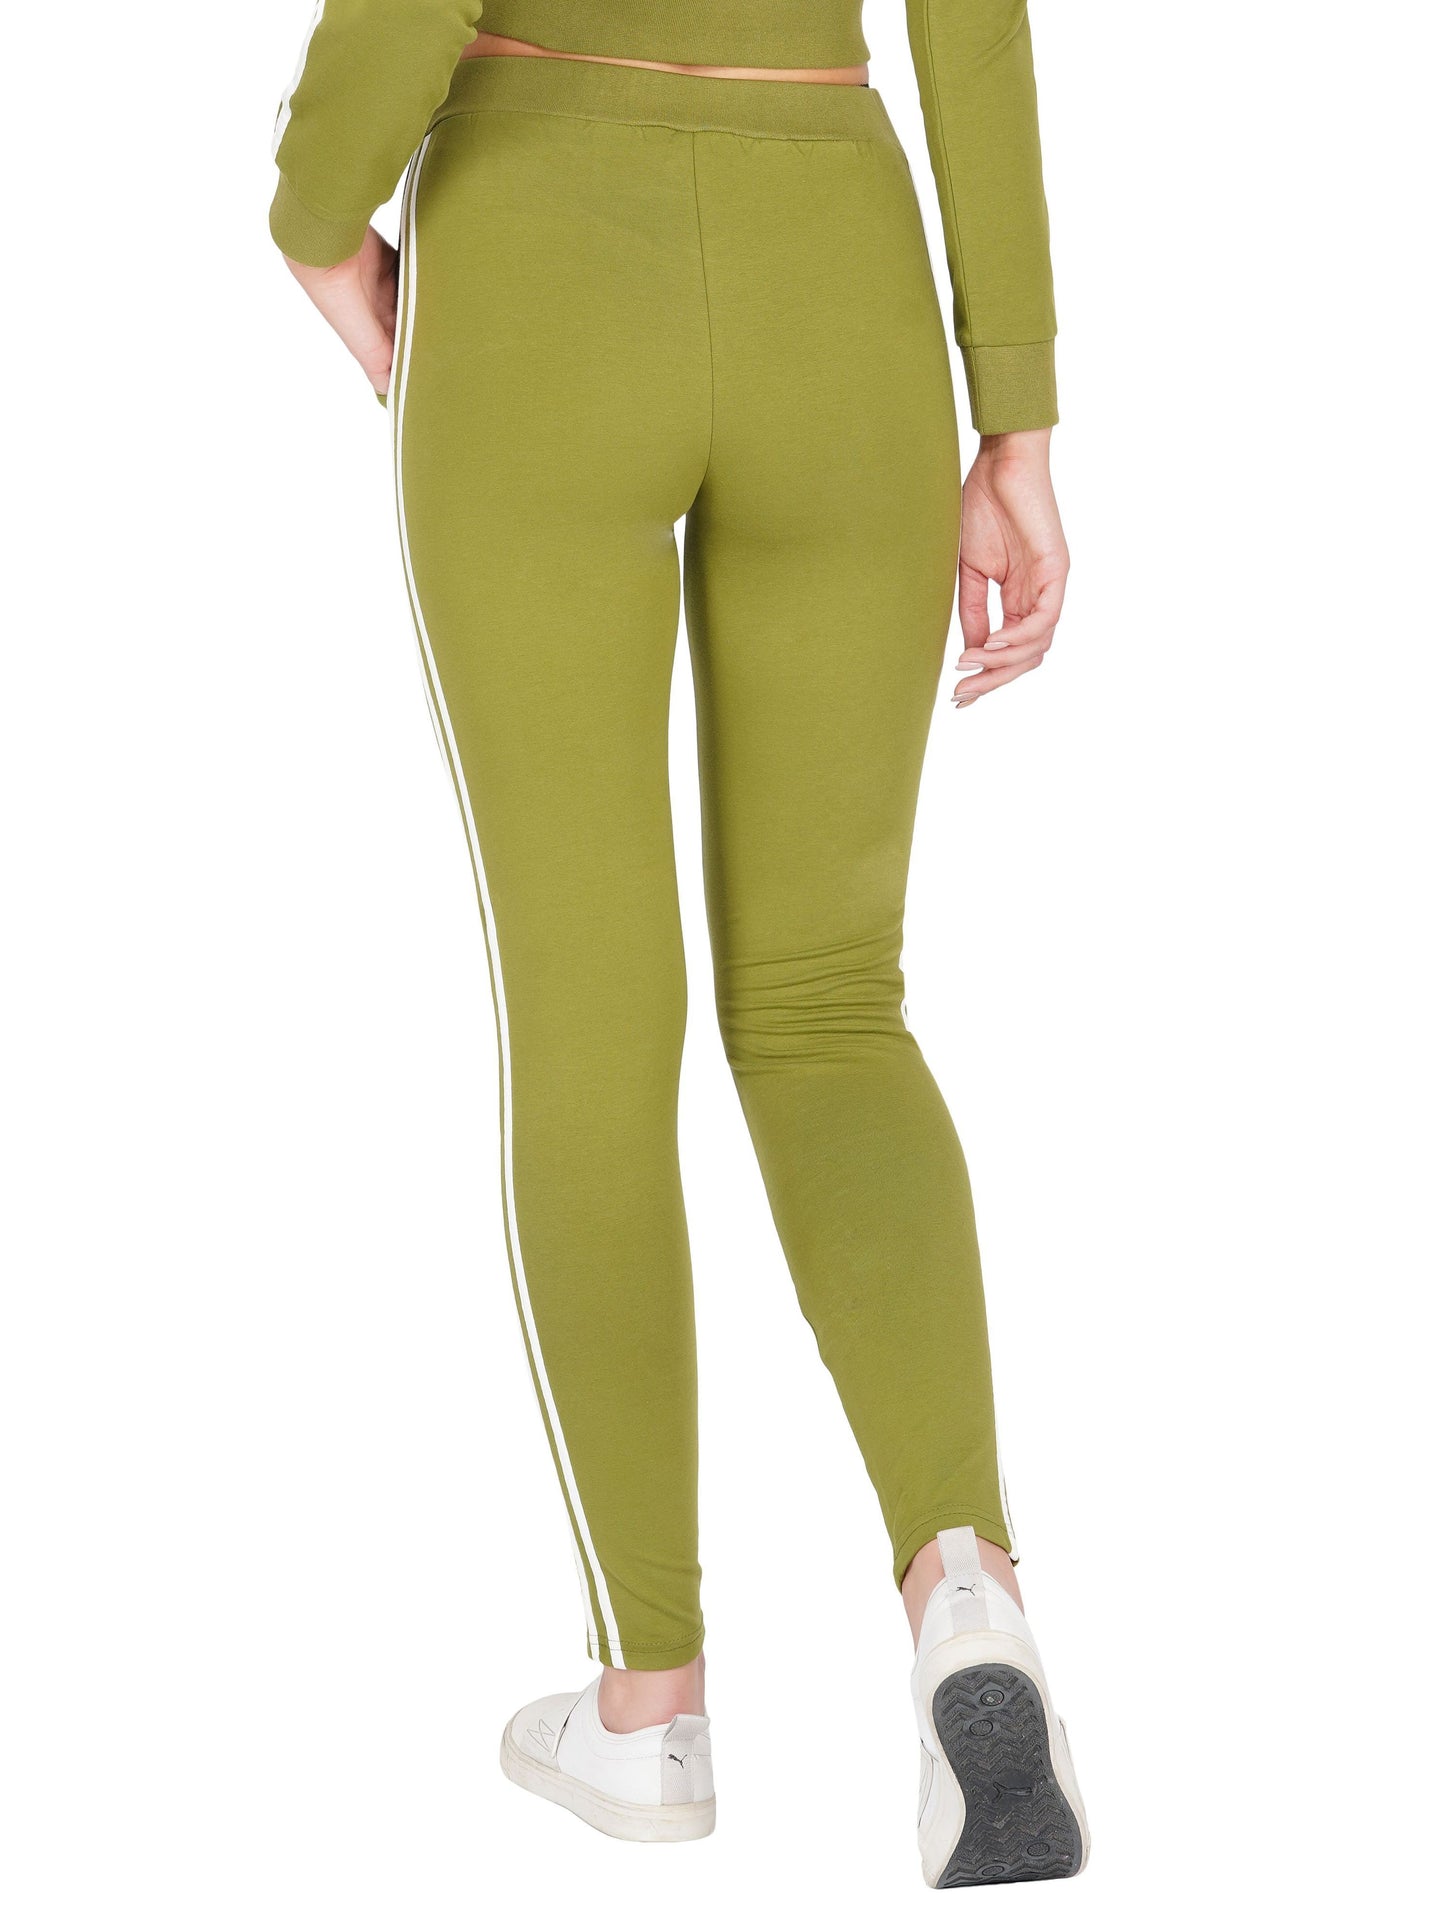 SLAY. Women's Olive Green Jogger Pants With White Stripes-clothing-to-slay.myshopify.com-Joggers